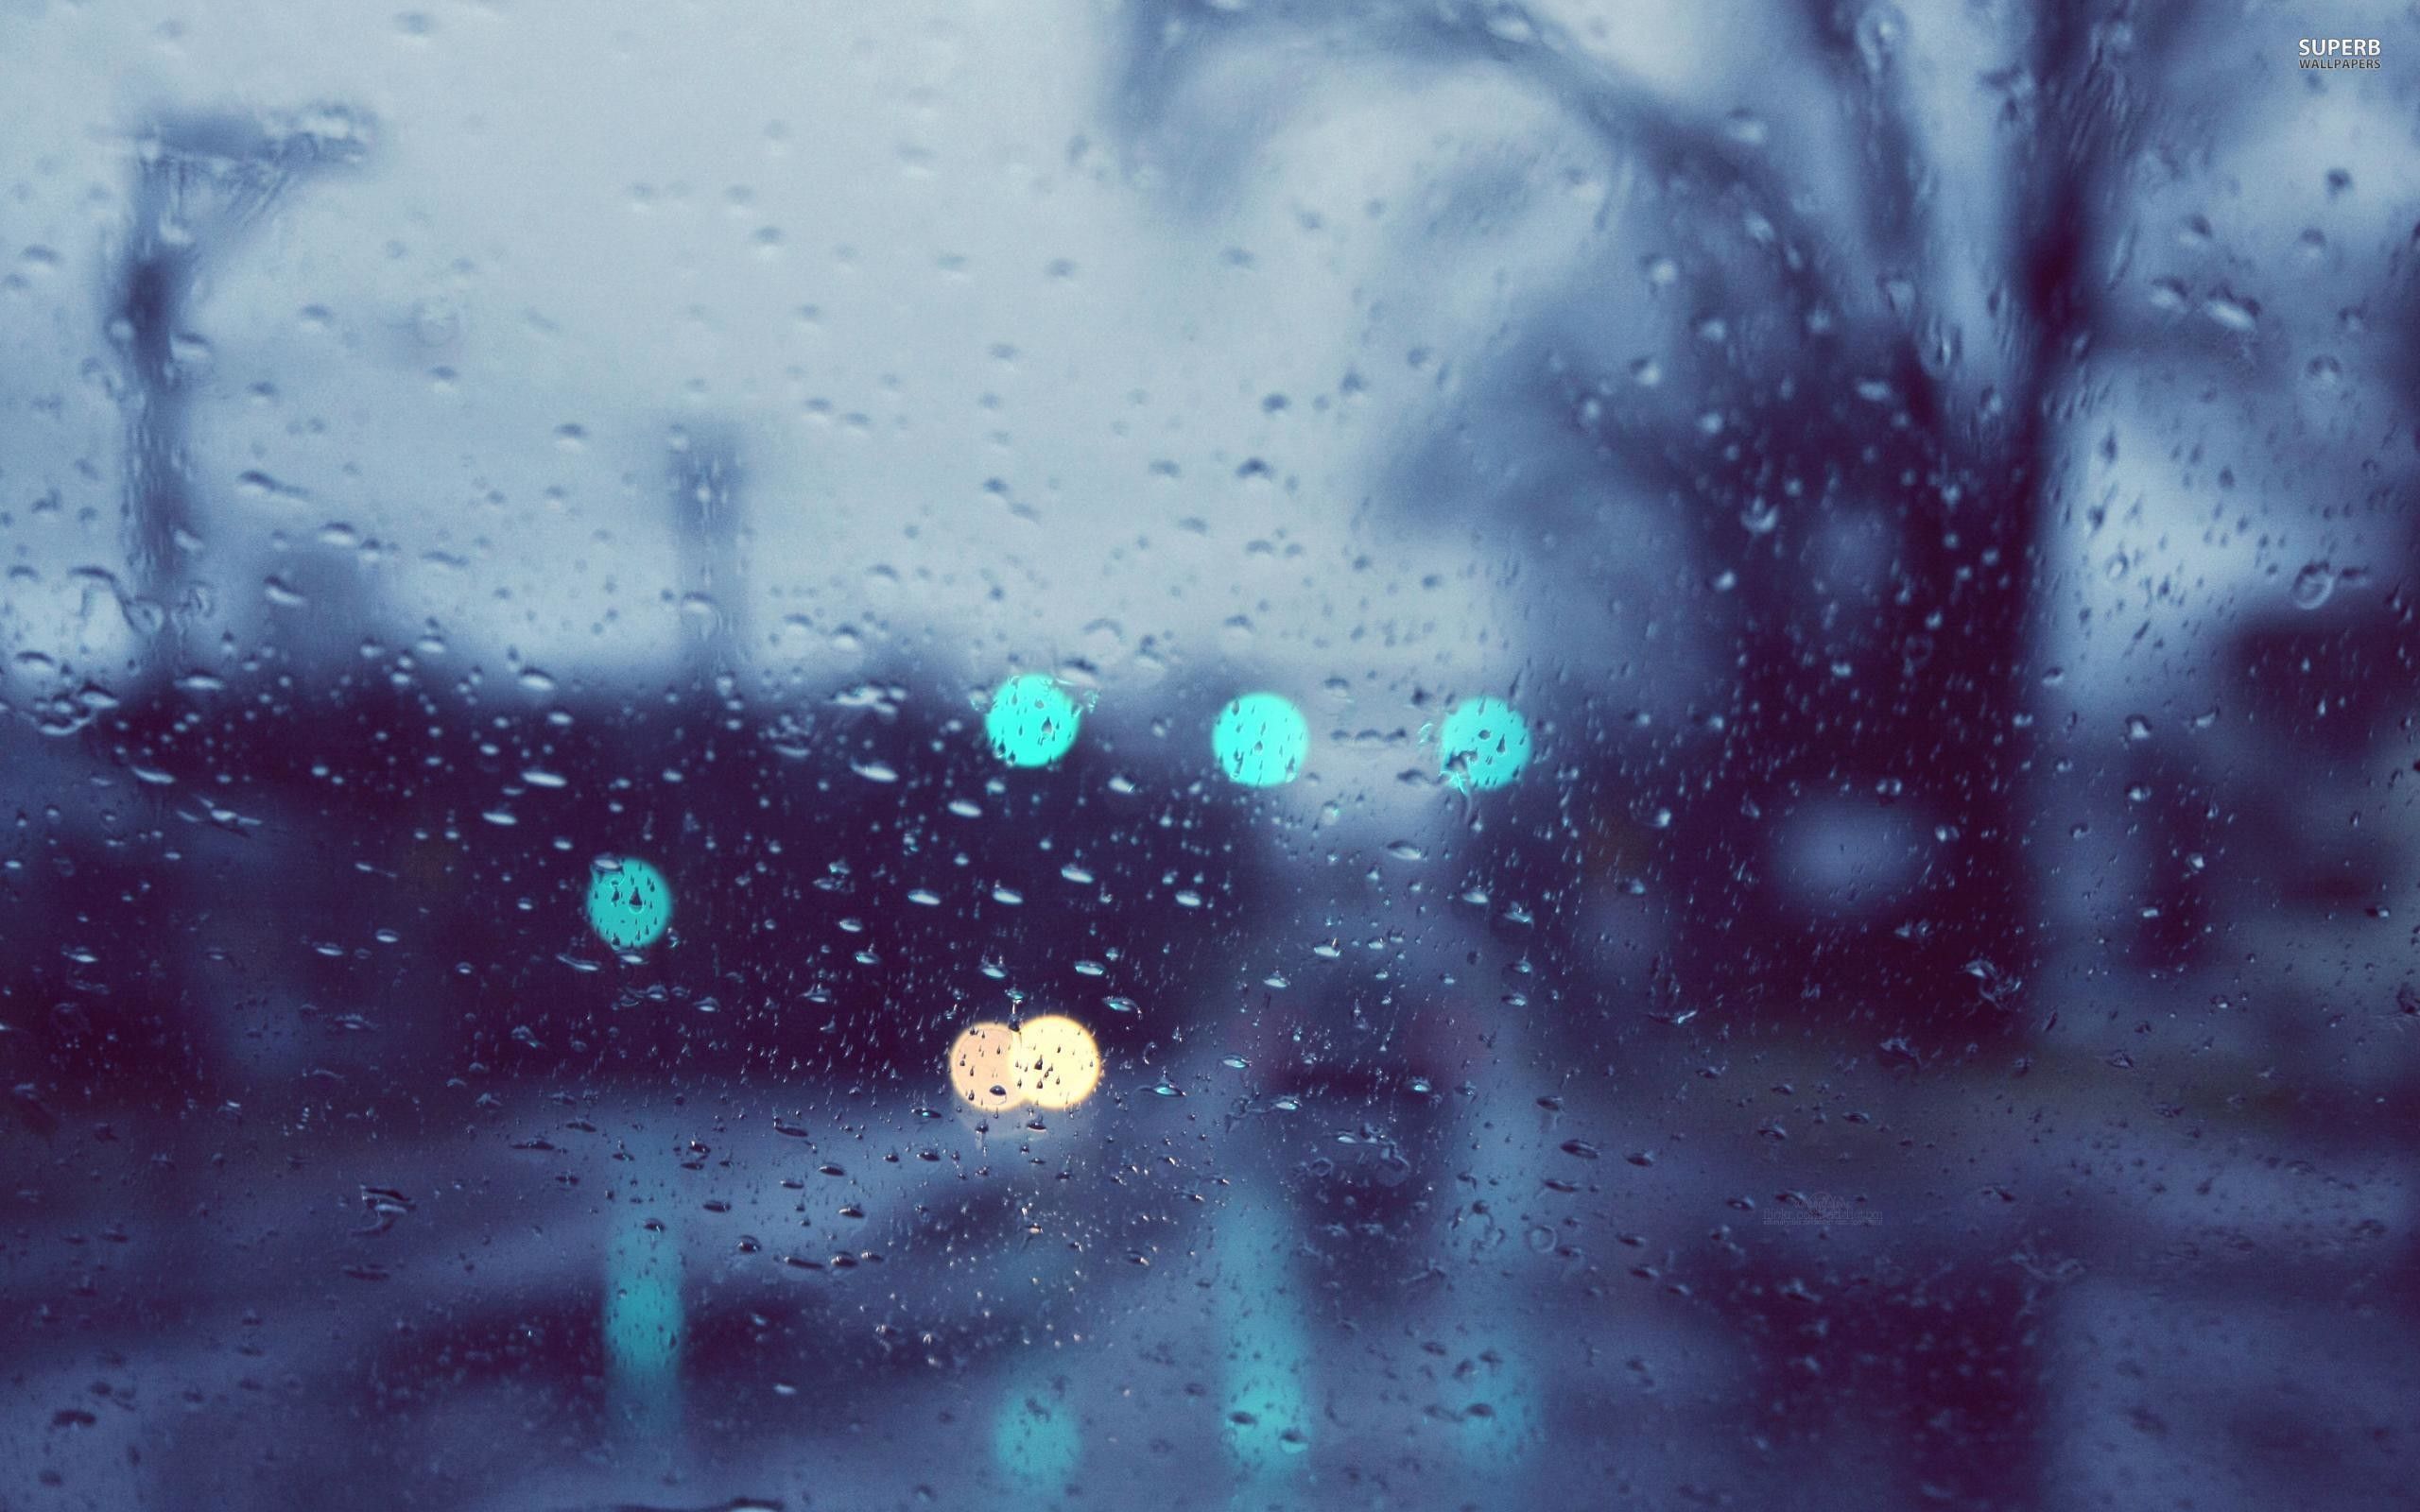 A rain covered window with street lights in the background - Rain